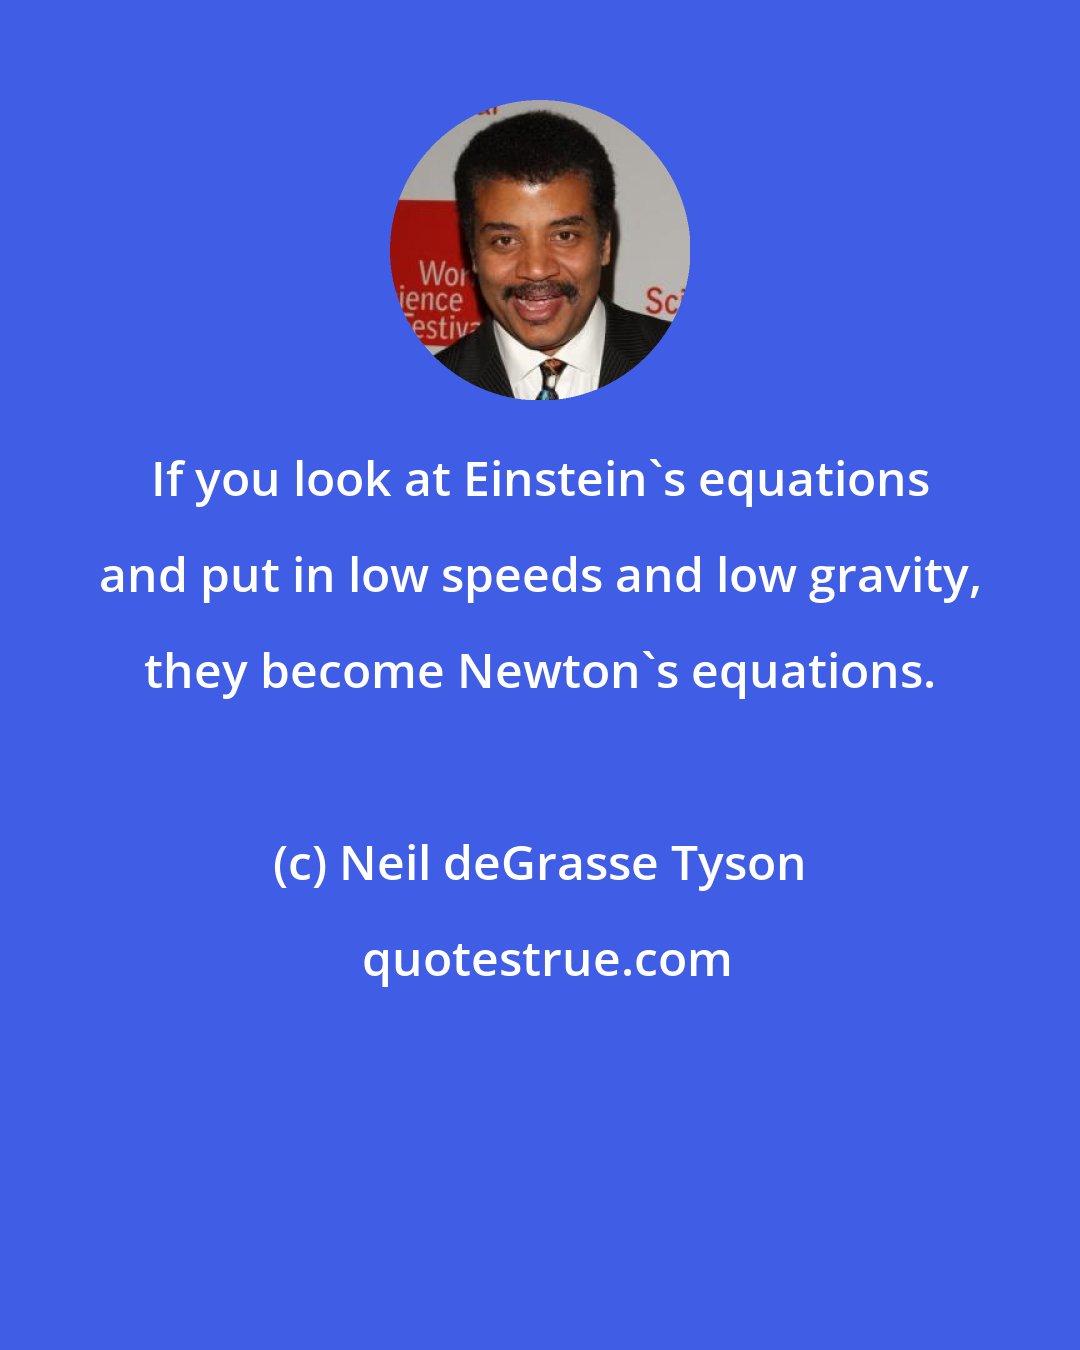 Neil deGrasse Tyson: If you look at Einstein's equations and put in low speeds and low gravity, they become Newton's equations.